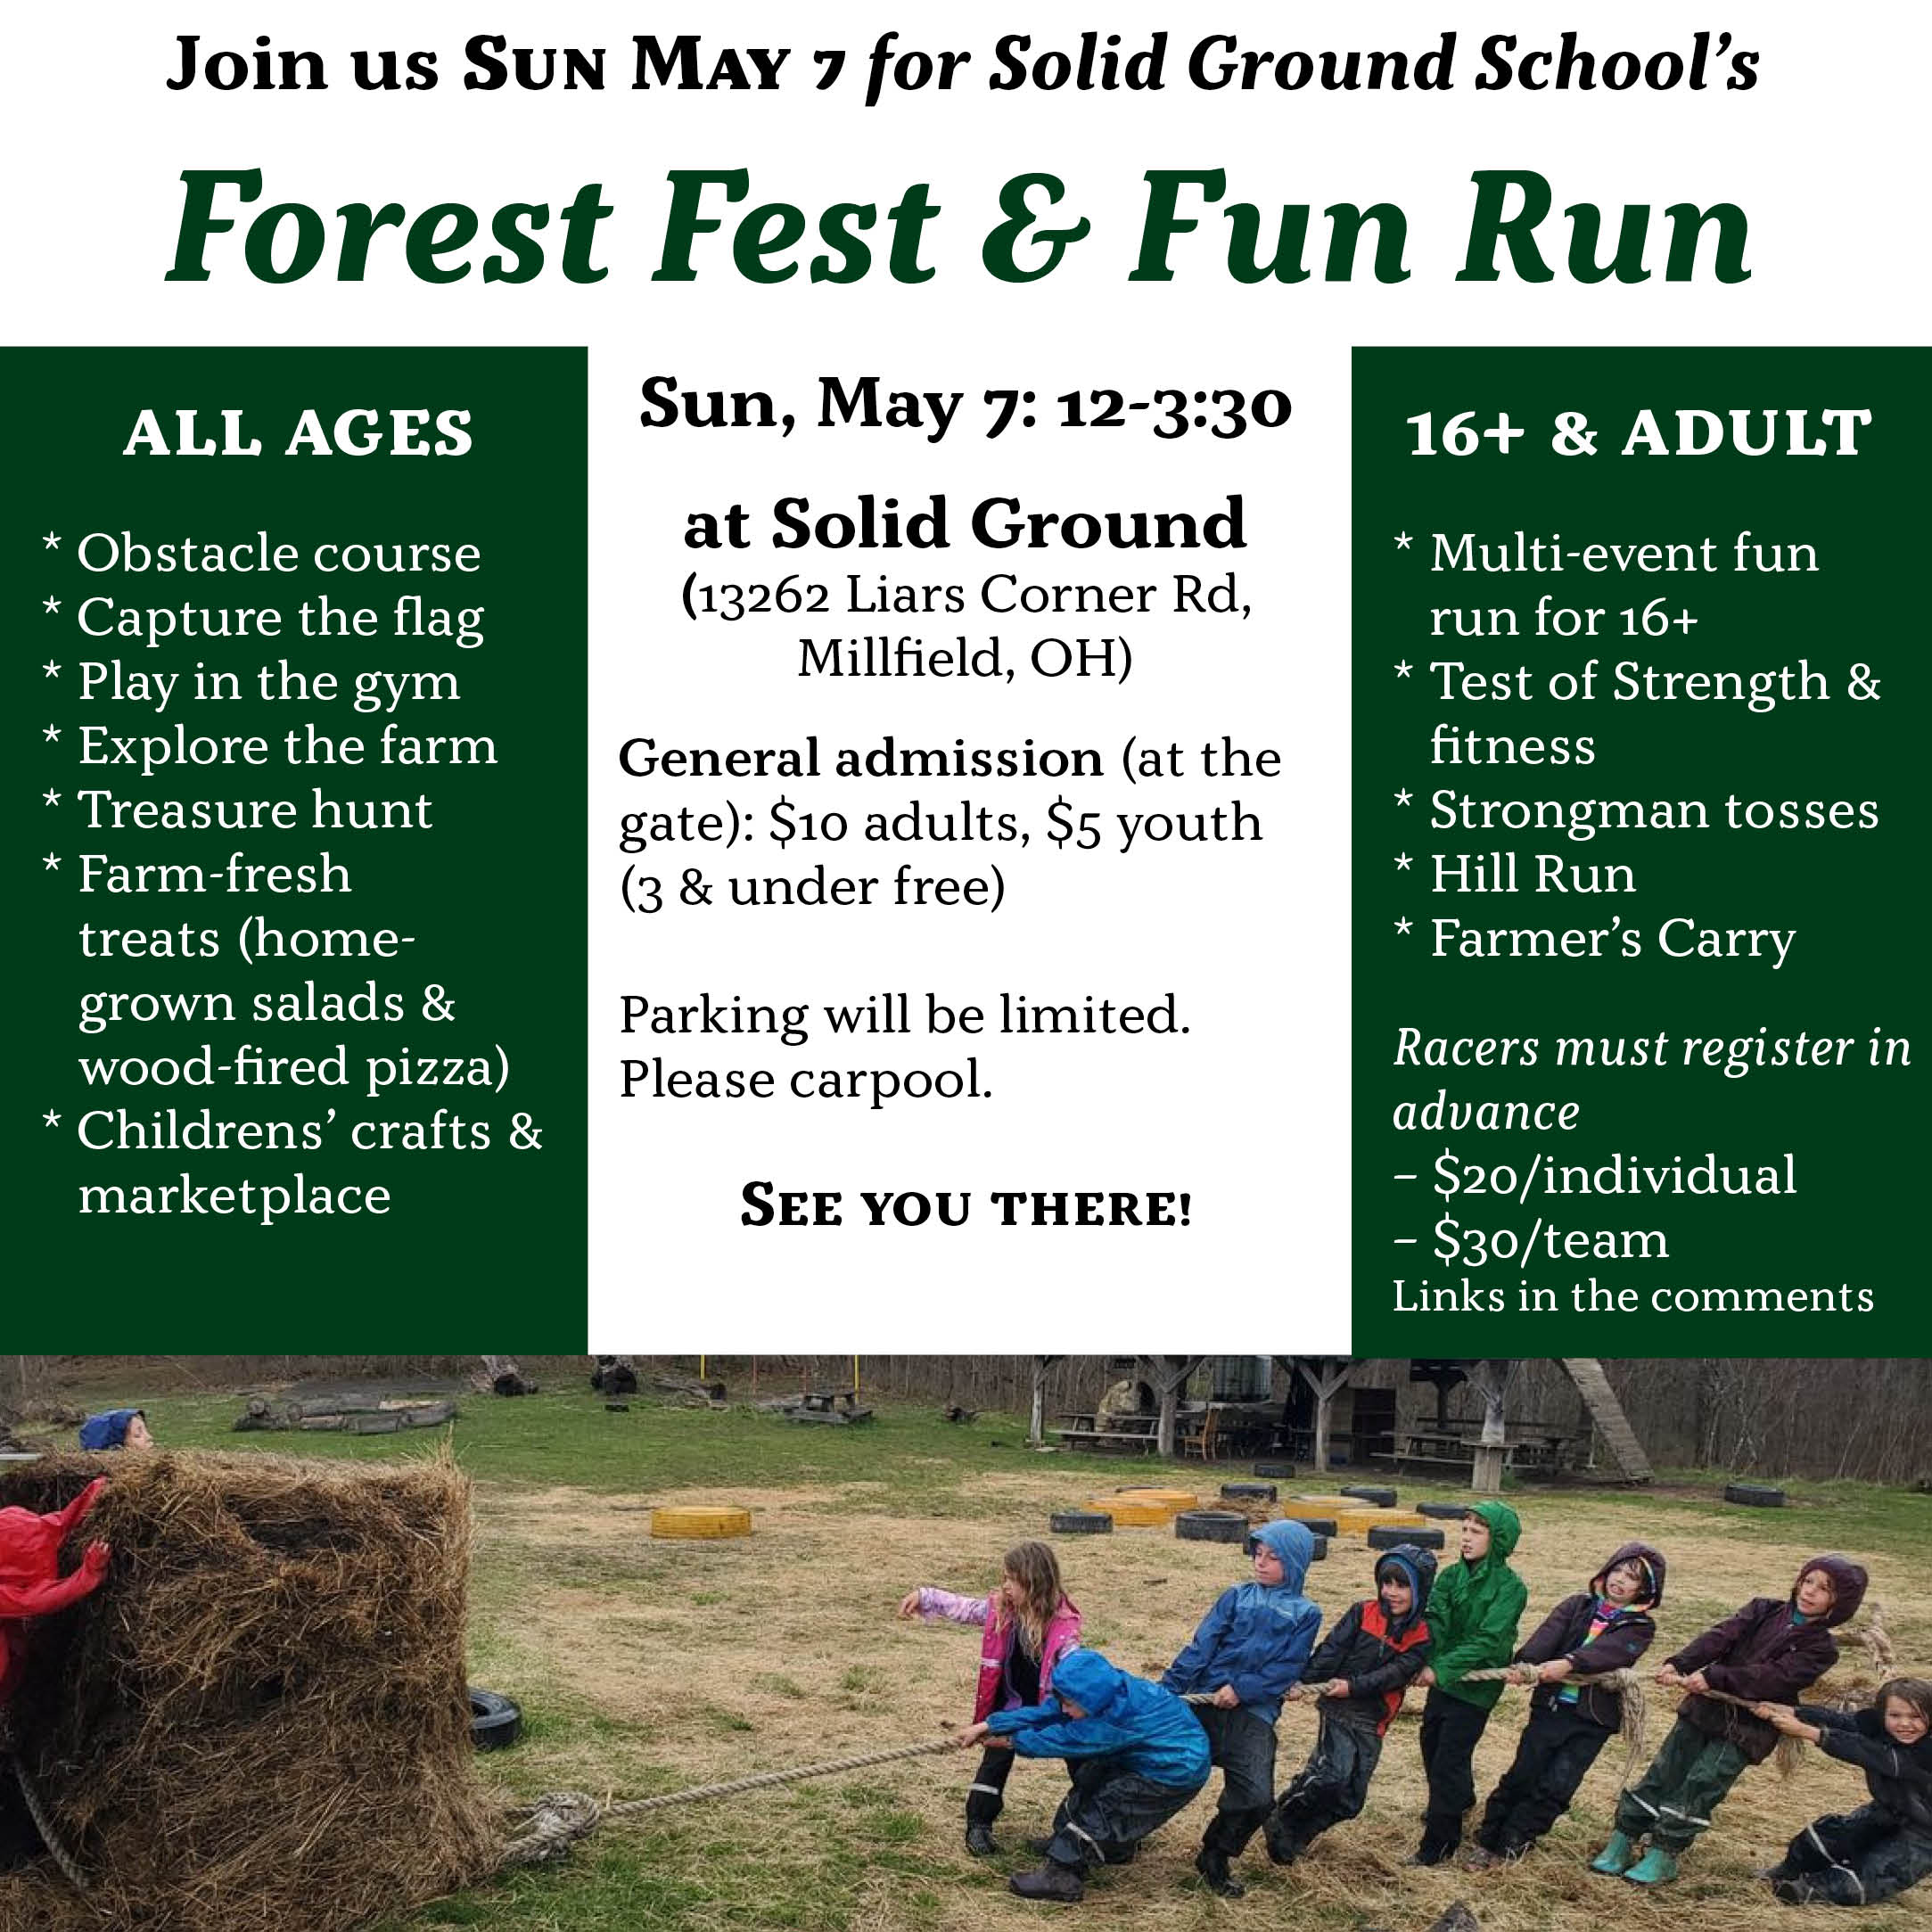 A flyer for the Forest Fest and Fun Run.